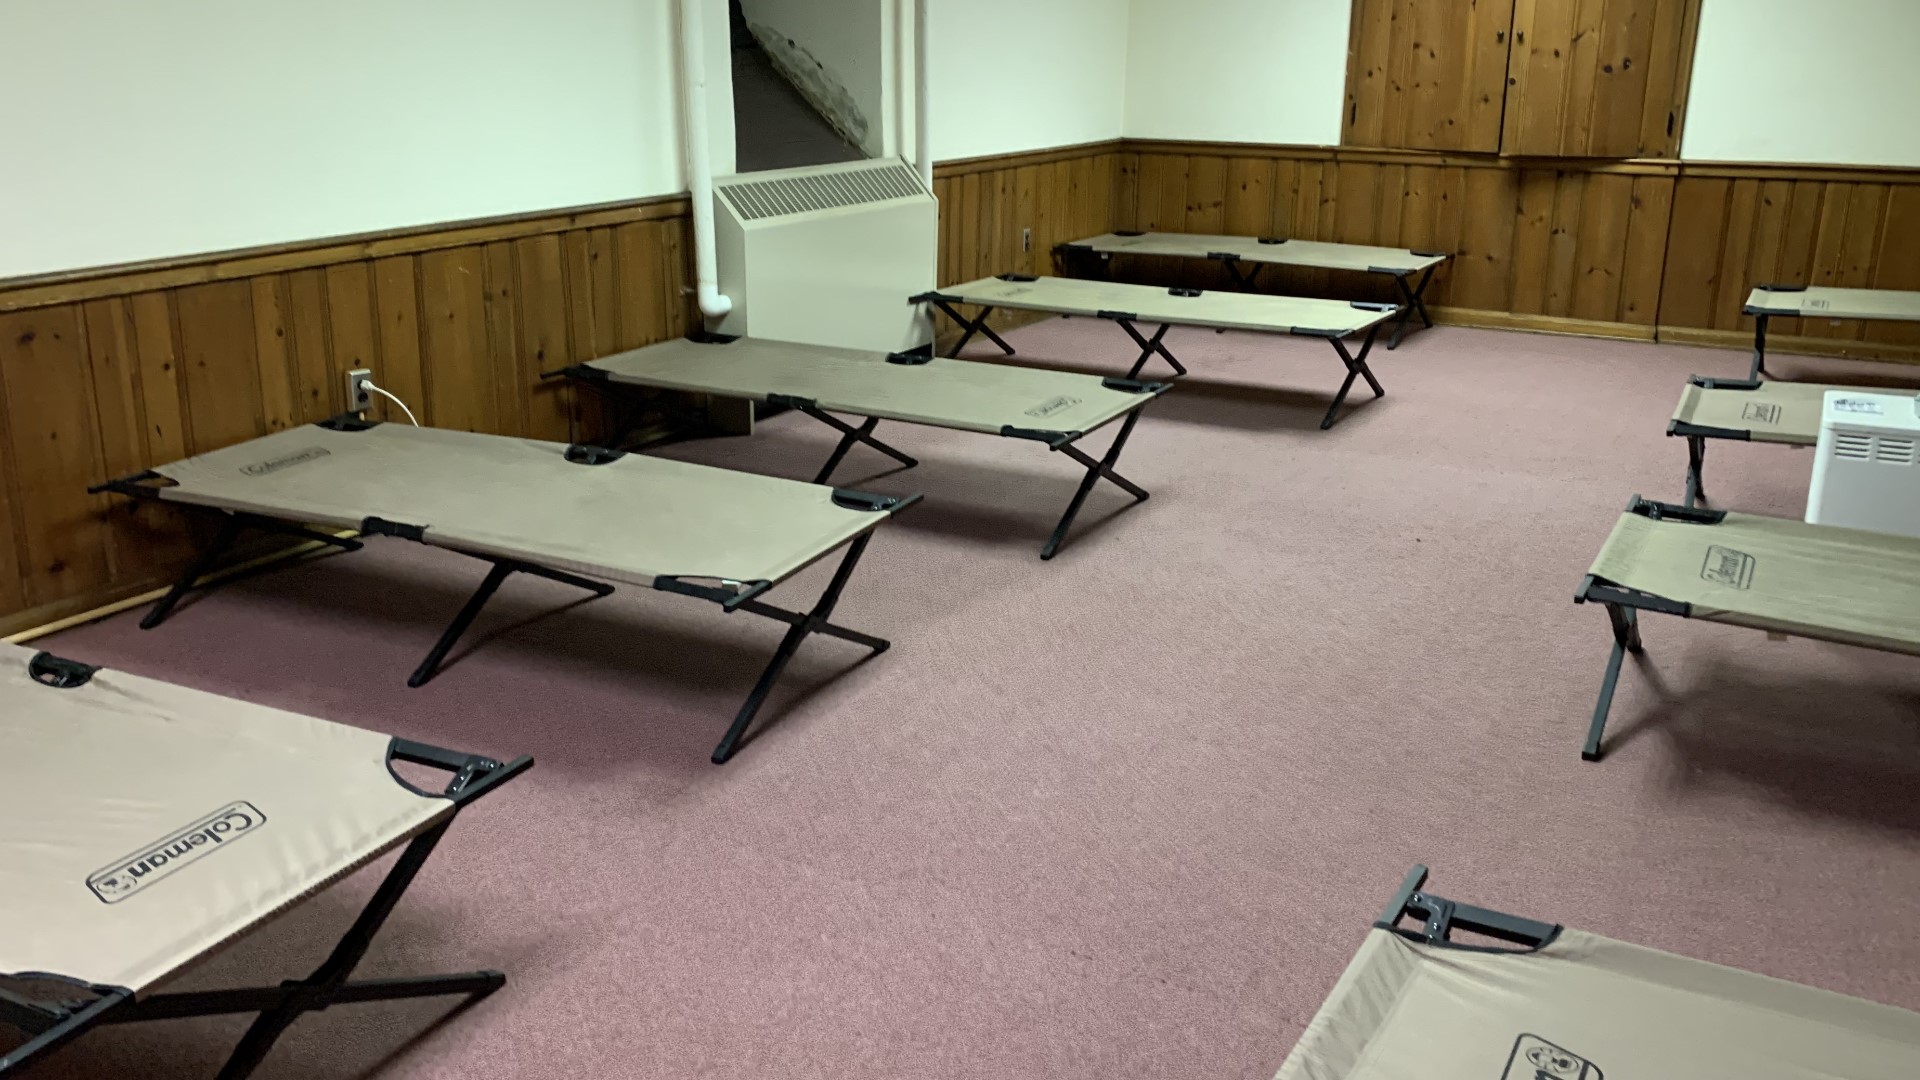 Christian Churches United is opening its doors and offering shelter to Harrisburg’s homeless.